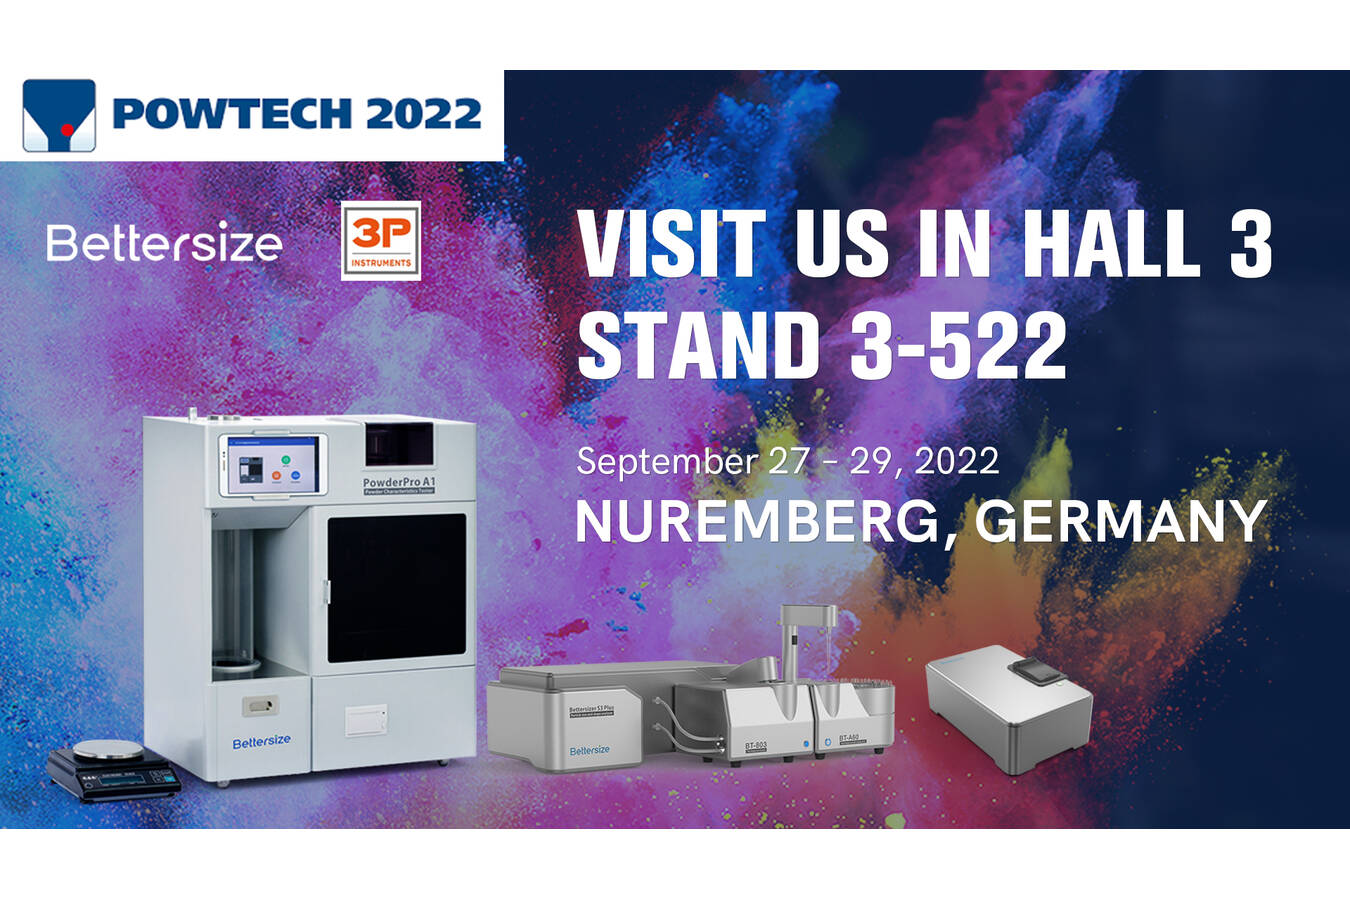 3P will present Bettersize Instruments at the Powtech